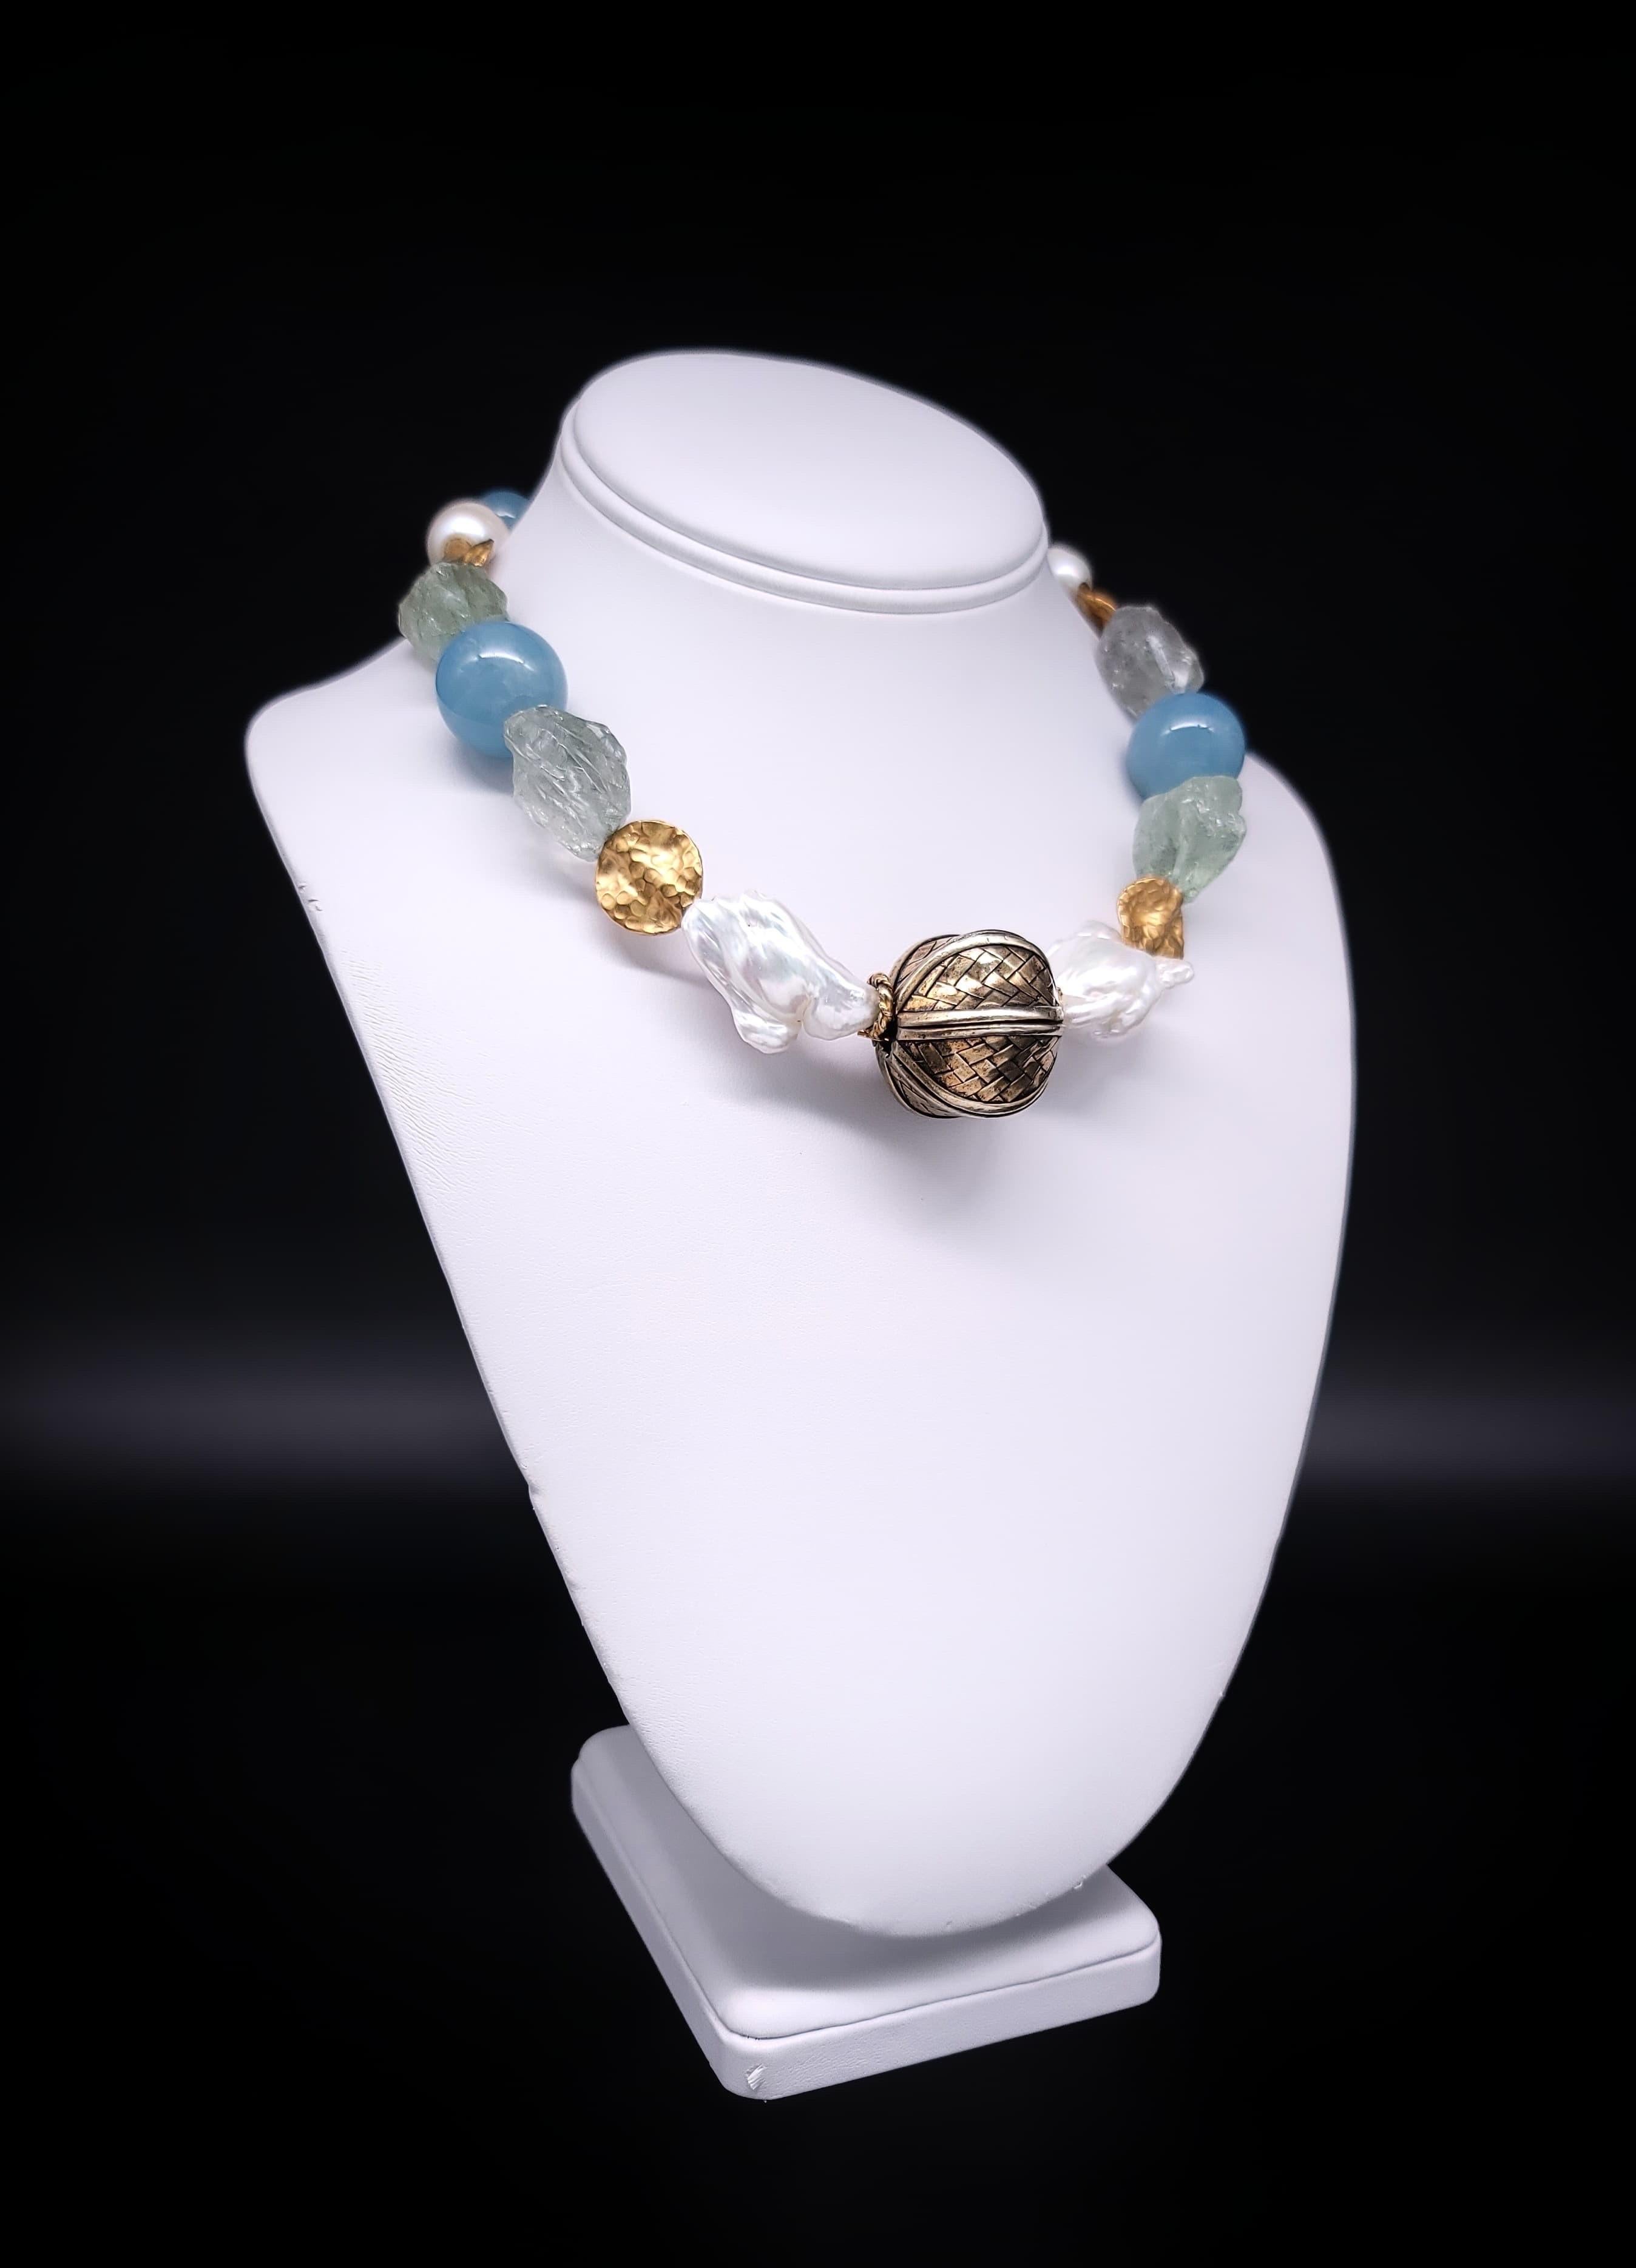 Crafted with meticulous attention to detail, this one-of-a-kind necklace is a masterpiece of elegance and individuality. Its striking design features a mesmerizing blend of polished 22mm Aquamarine beads in varying shades of blue, elegantly